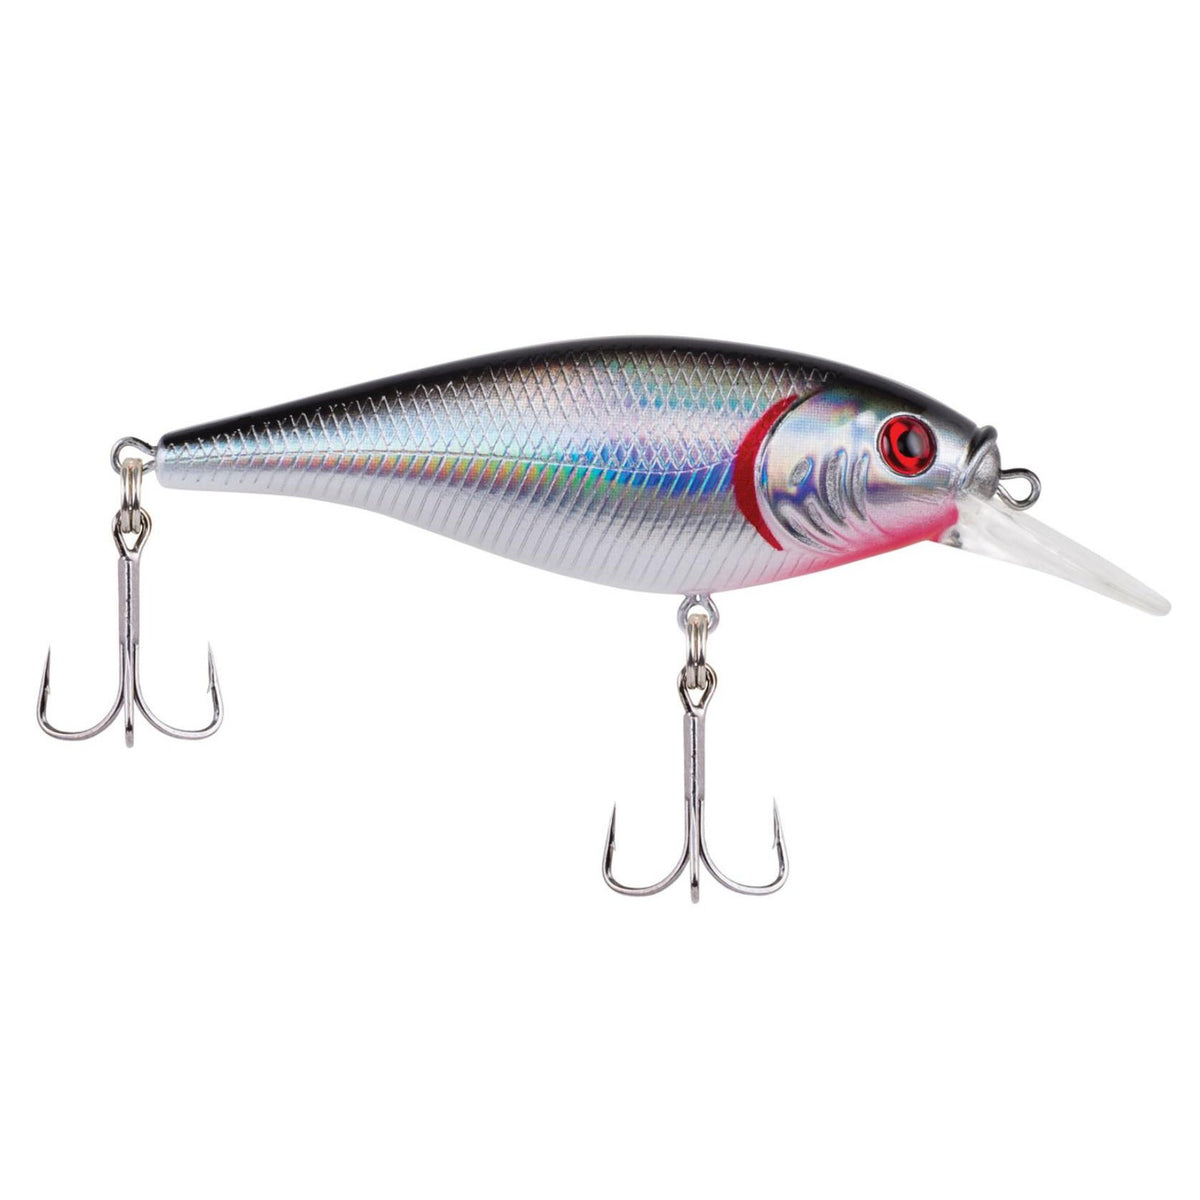 Berkley Flicker Shad Fishing Lure 3 Pack, Assorted Colors, Size: Standard